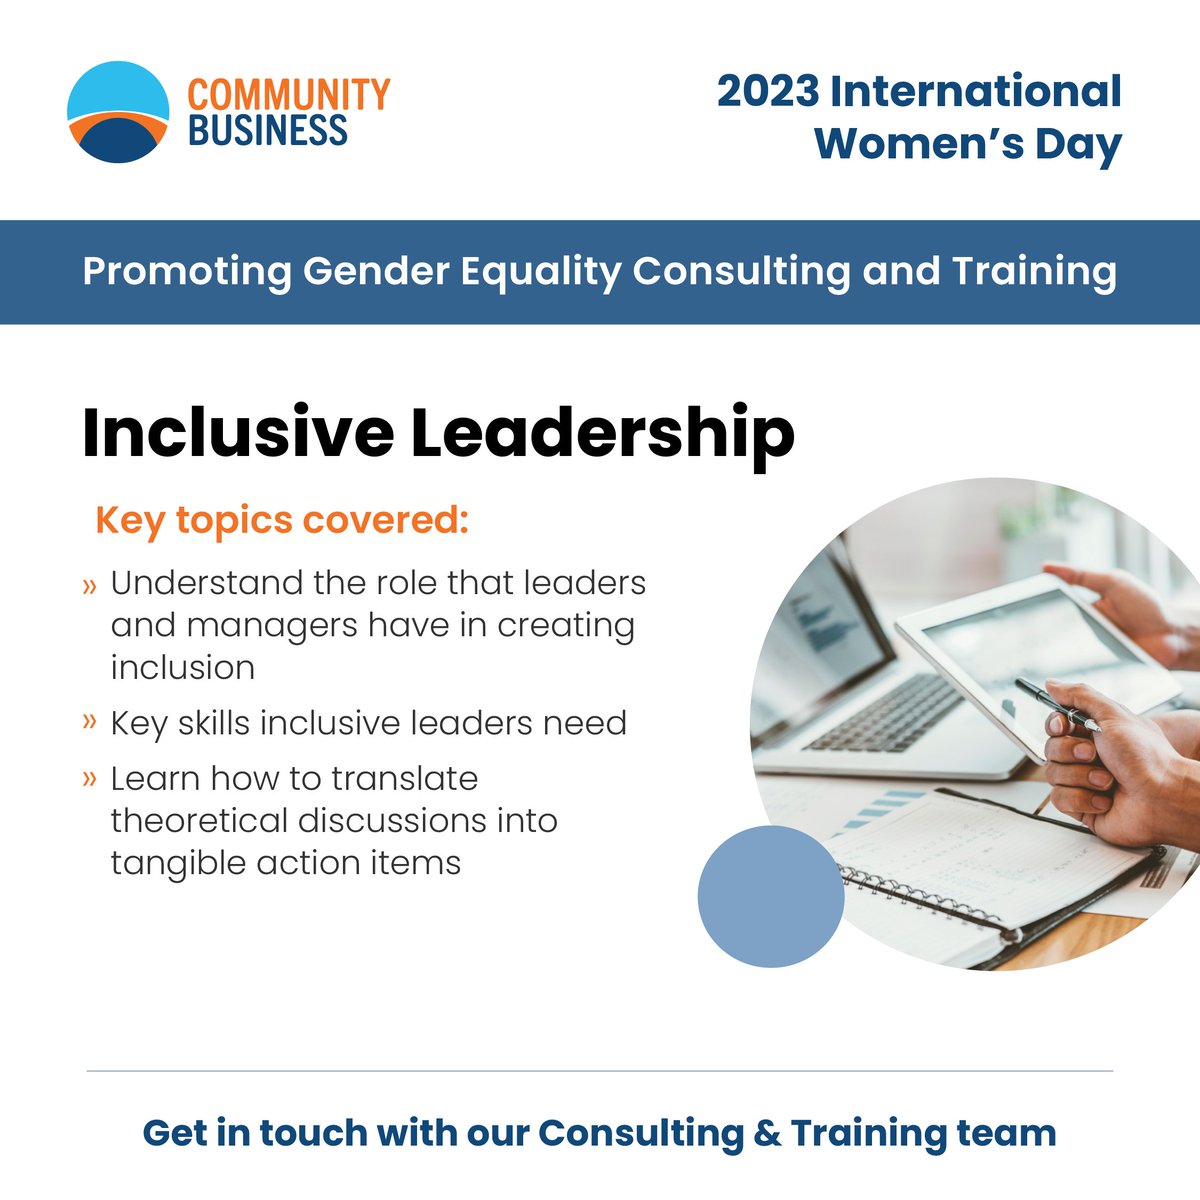 📣Updated Training Programmes for 2023 IWD 👉Find Out More About Our Campaigns: communitybusiness.org/training-consu… ------------ As part of our IWD celebrations, we are announcing our newly updated signature training programmes: 👉Gender Diversity 👉Inclusive Leadership